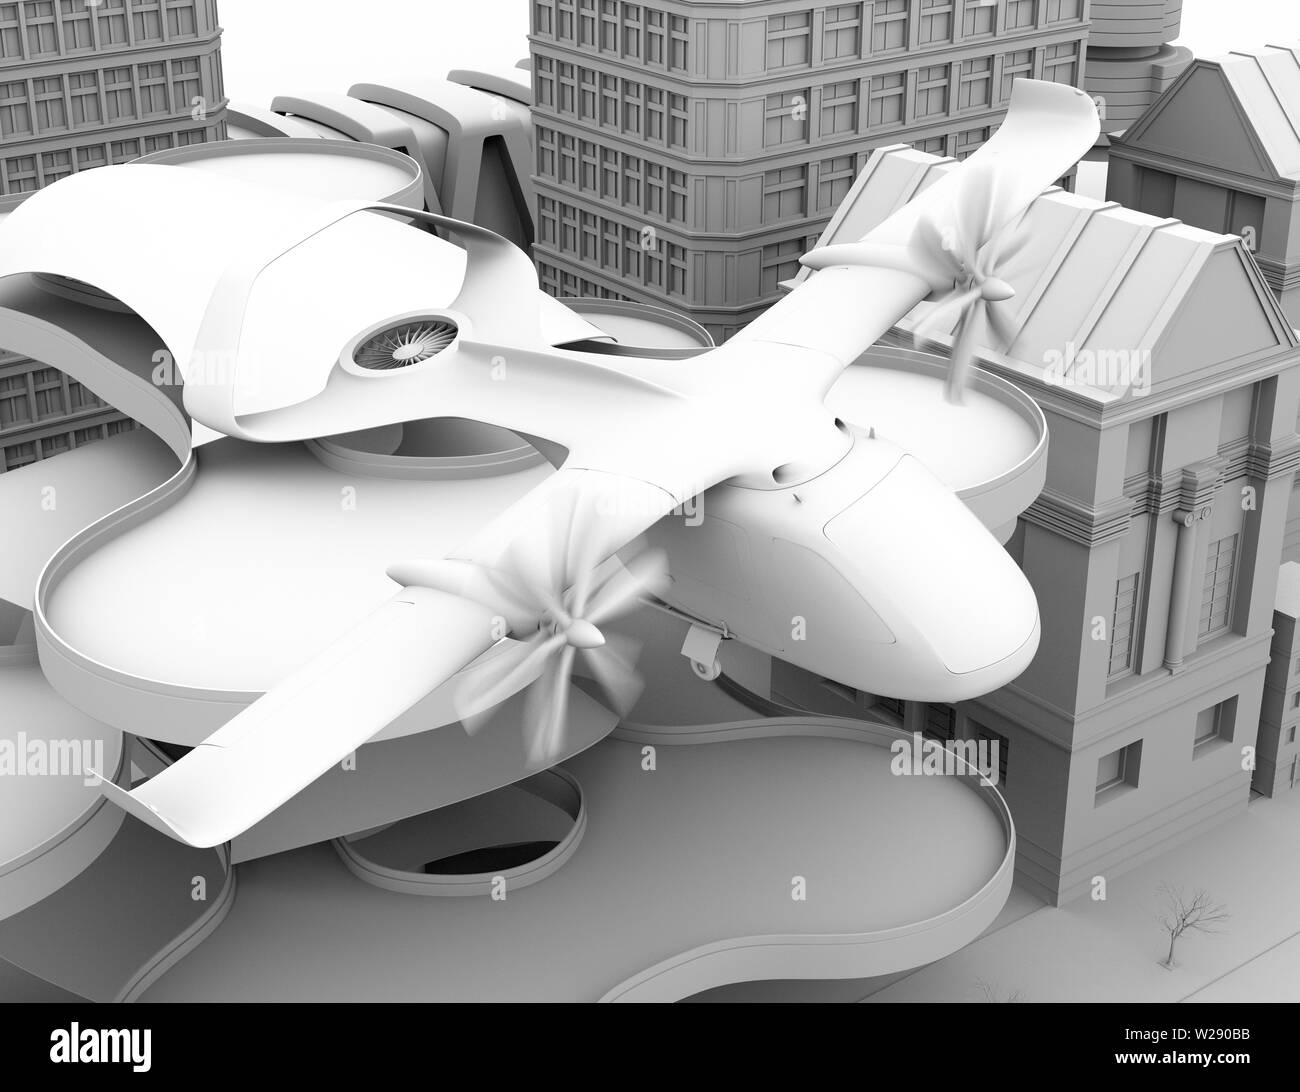 Clay rendering of E-VTOL passenger aircraft closing to airport prepare to landing. 3D rendering image. Stock Photo